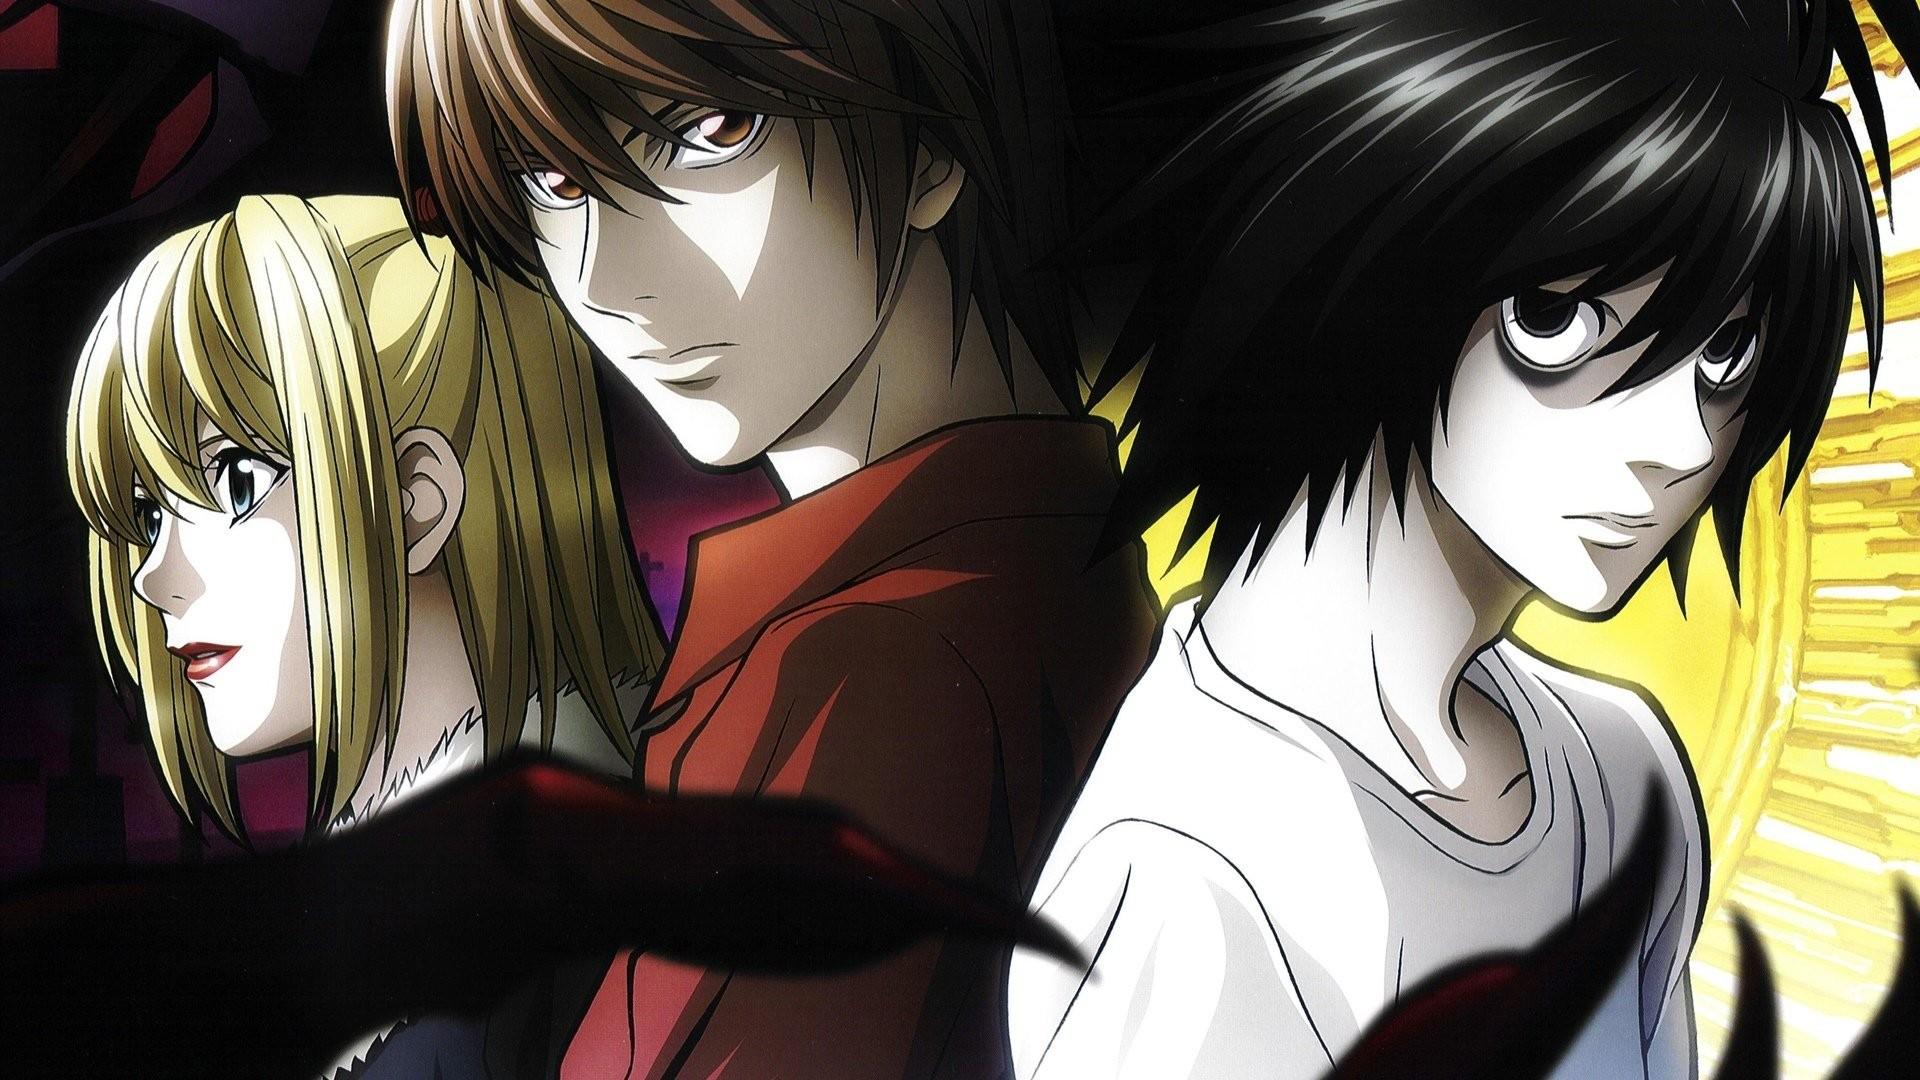 Three Death Note characters in promo shot